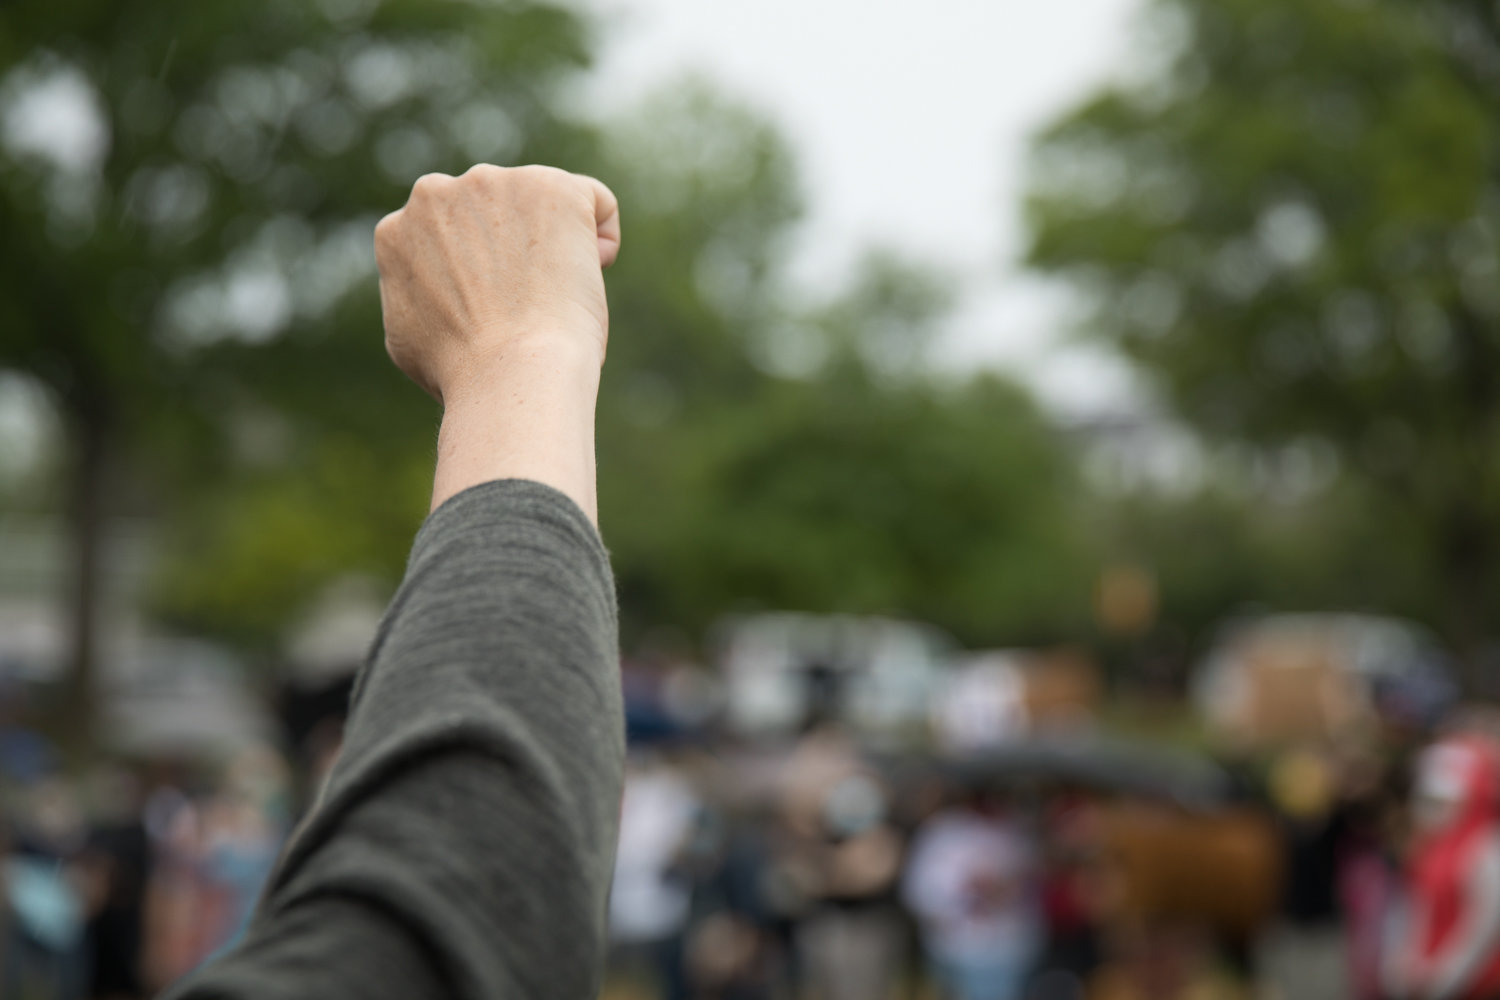 A community member raises her fist at a vigil in Seton Park honoring the lives of African Americans who died as a result of police brutality. The peaceful gathering was organized following rumors of a violent protest planned for the park that turned out to be untrue.